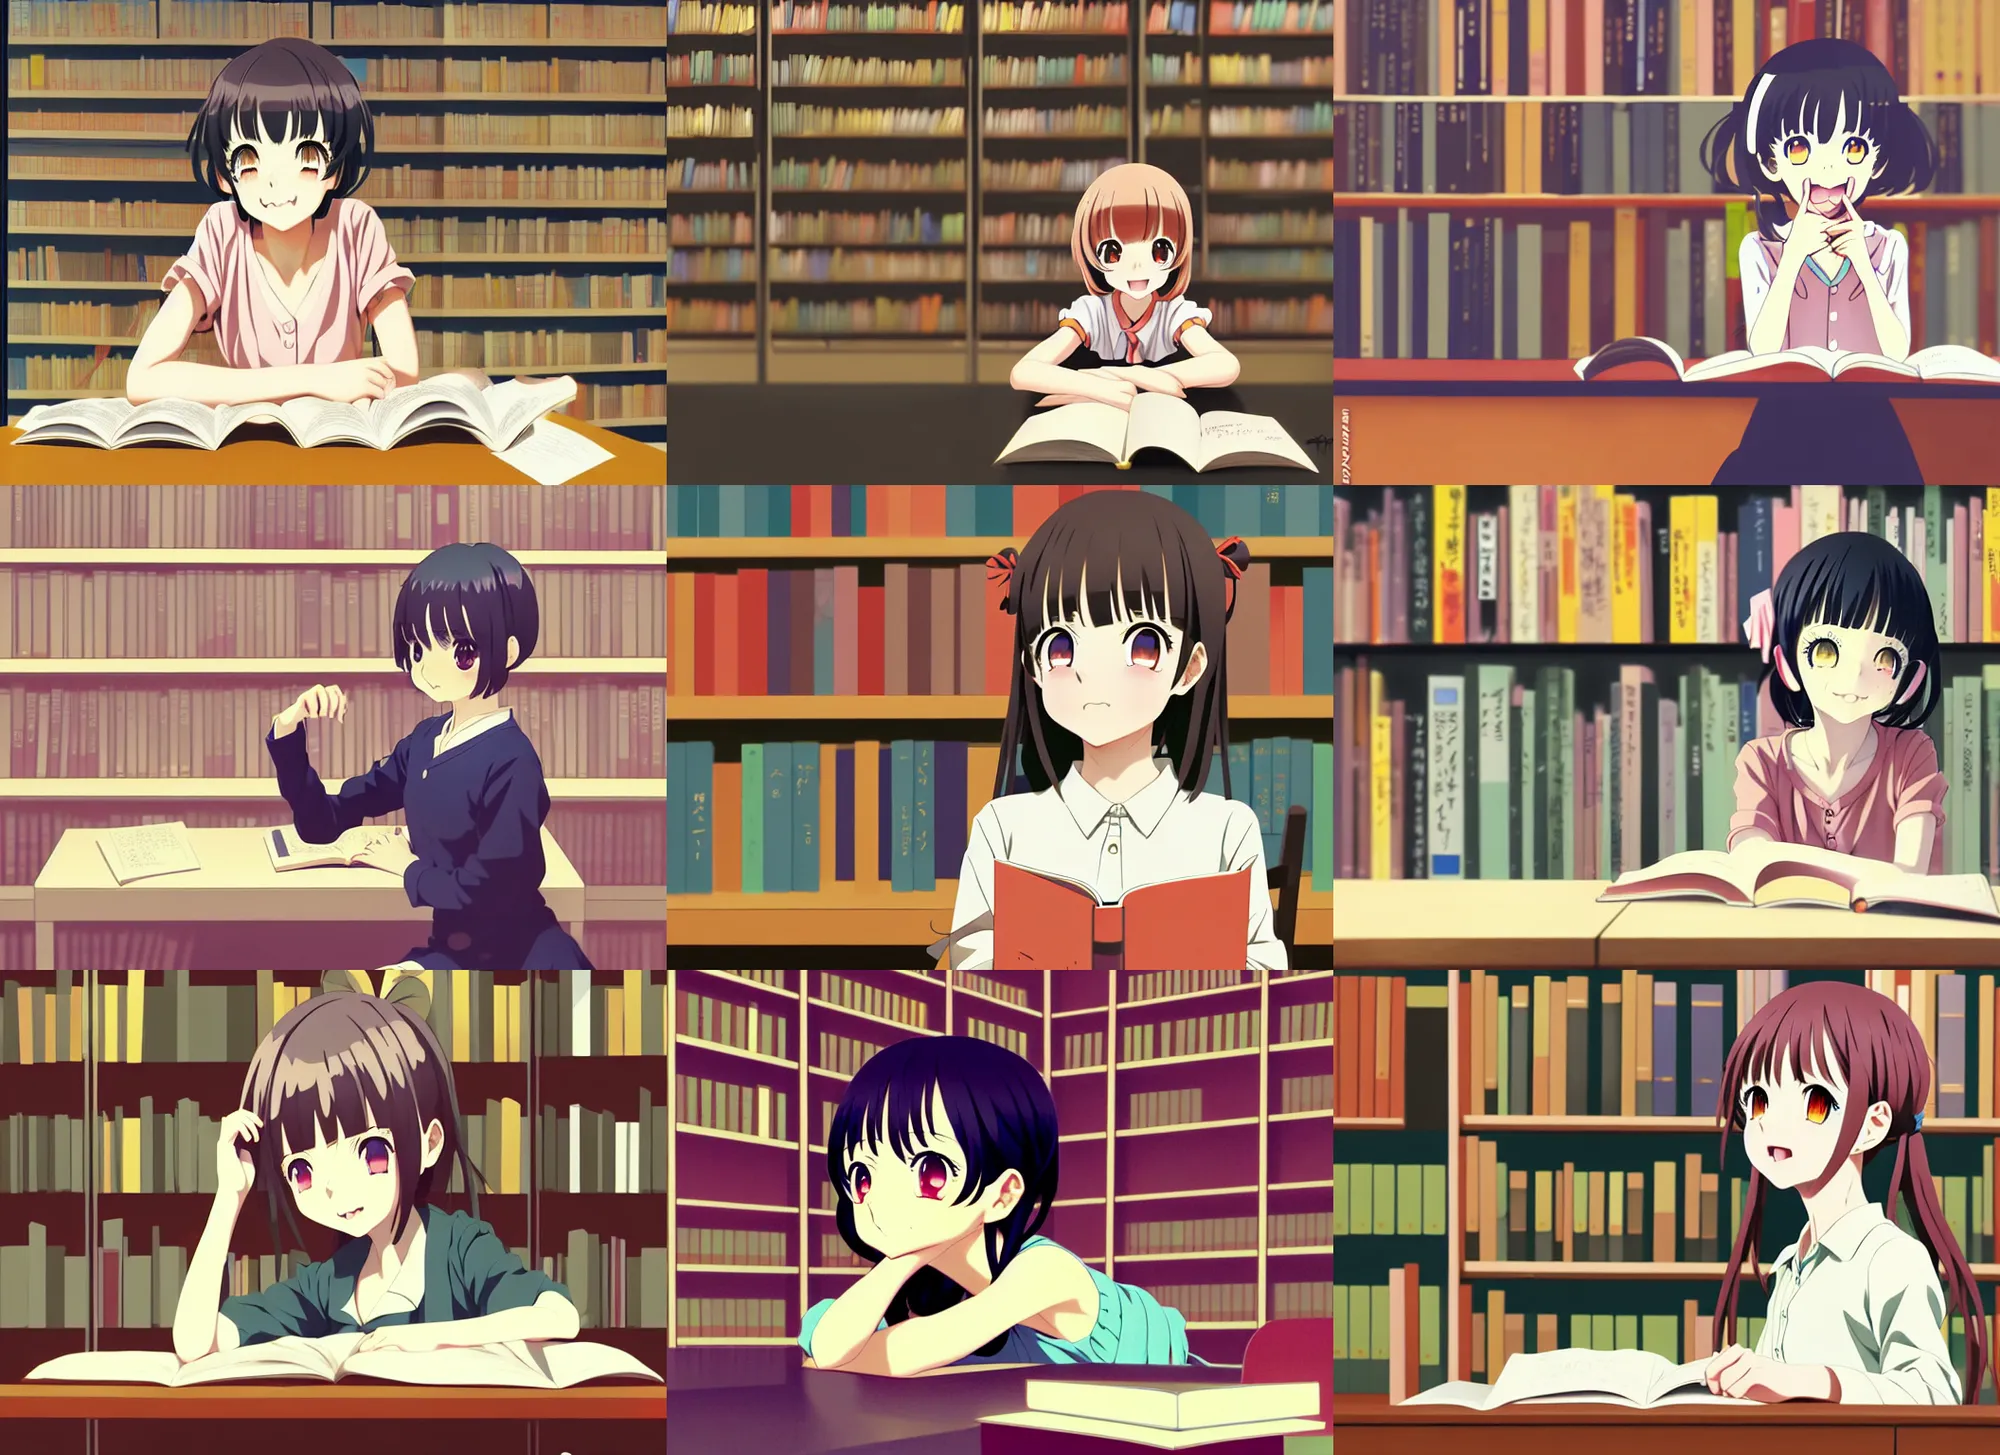 Prompt: anime visual, portrait of a happy young girl in a library interior reading desk, cute face by ilya kuvshinov, yoh yoshinari, dynamic pose, dynamic perspective, cel shaded, flat shading mucha, rounded eyes, moody, shadows, kyoani, natsume yuujinchou, smooth facial features